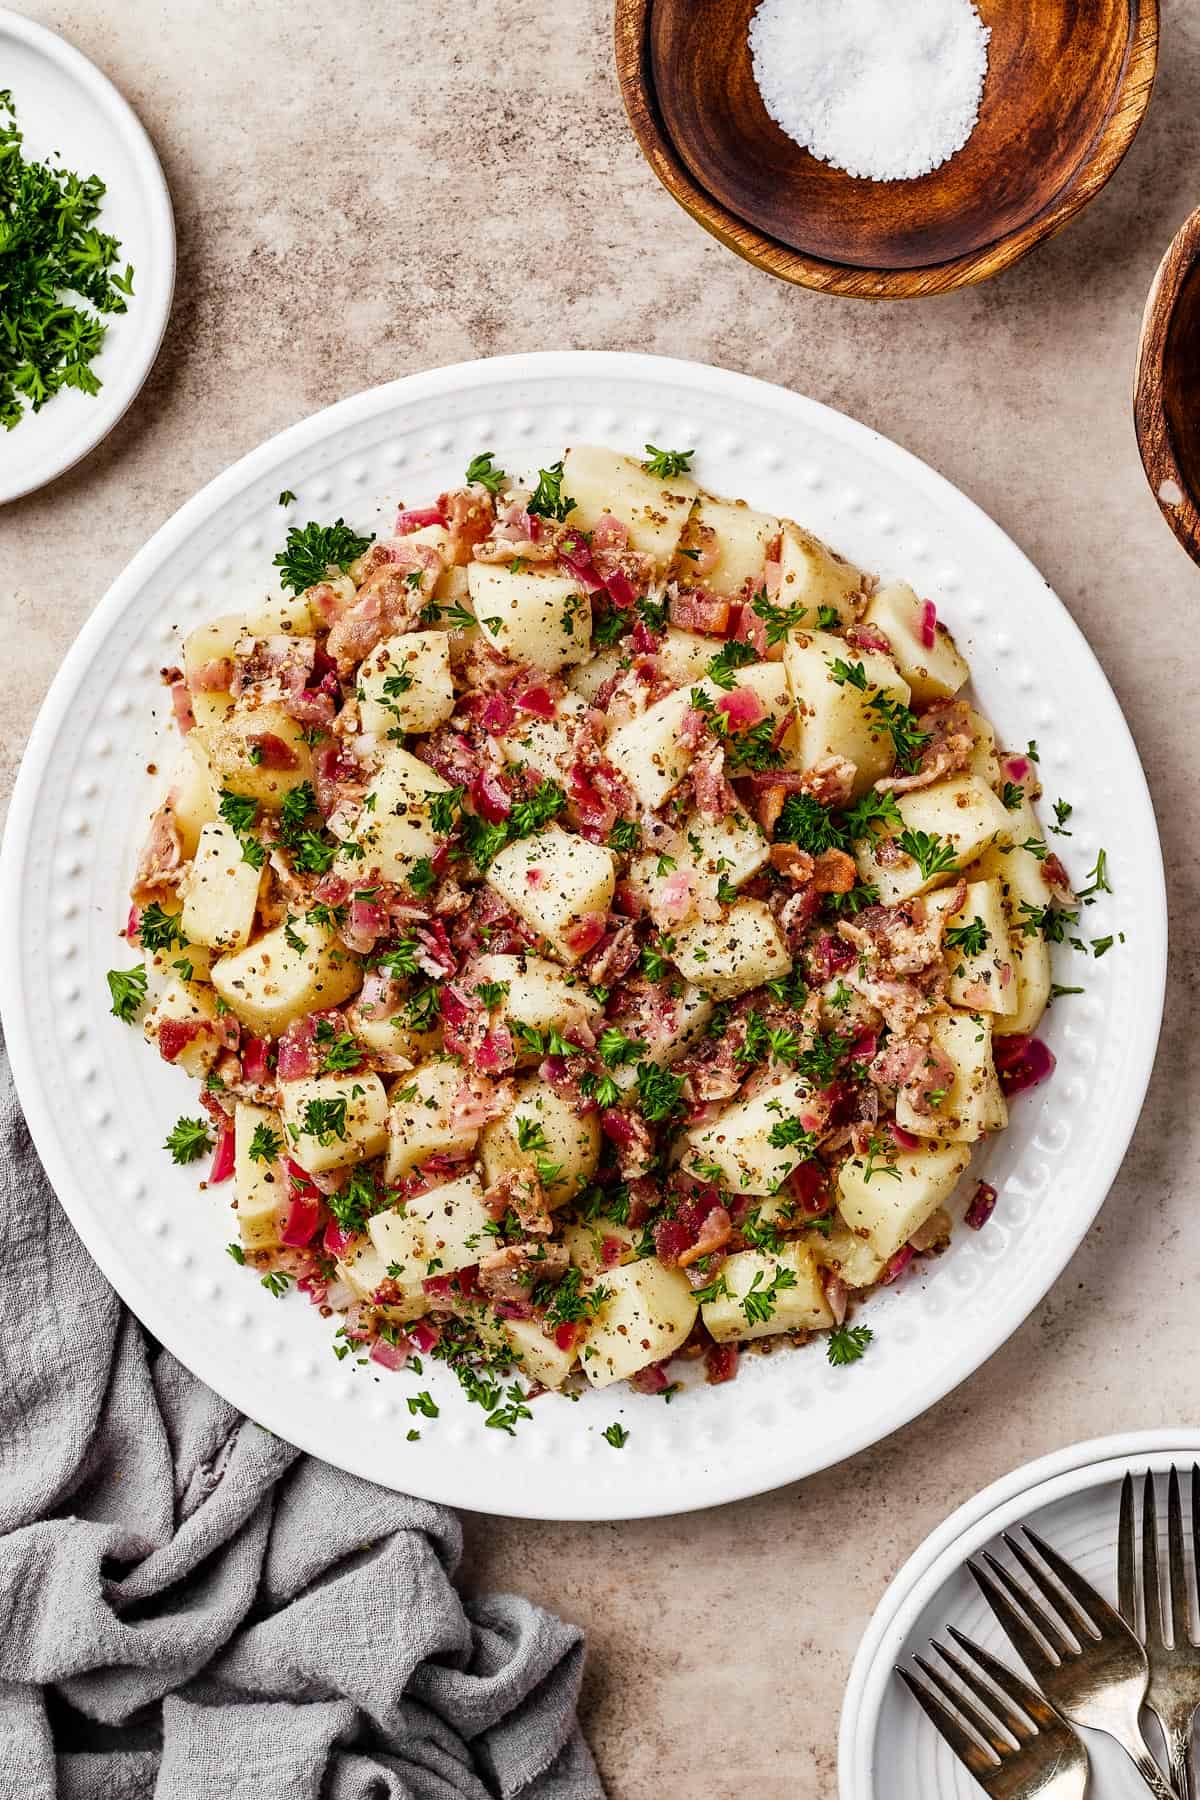 A plate of warm potato salad with herbs and bacon.